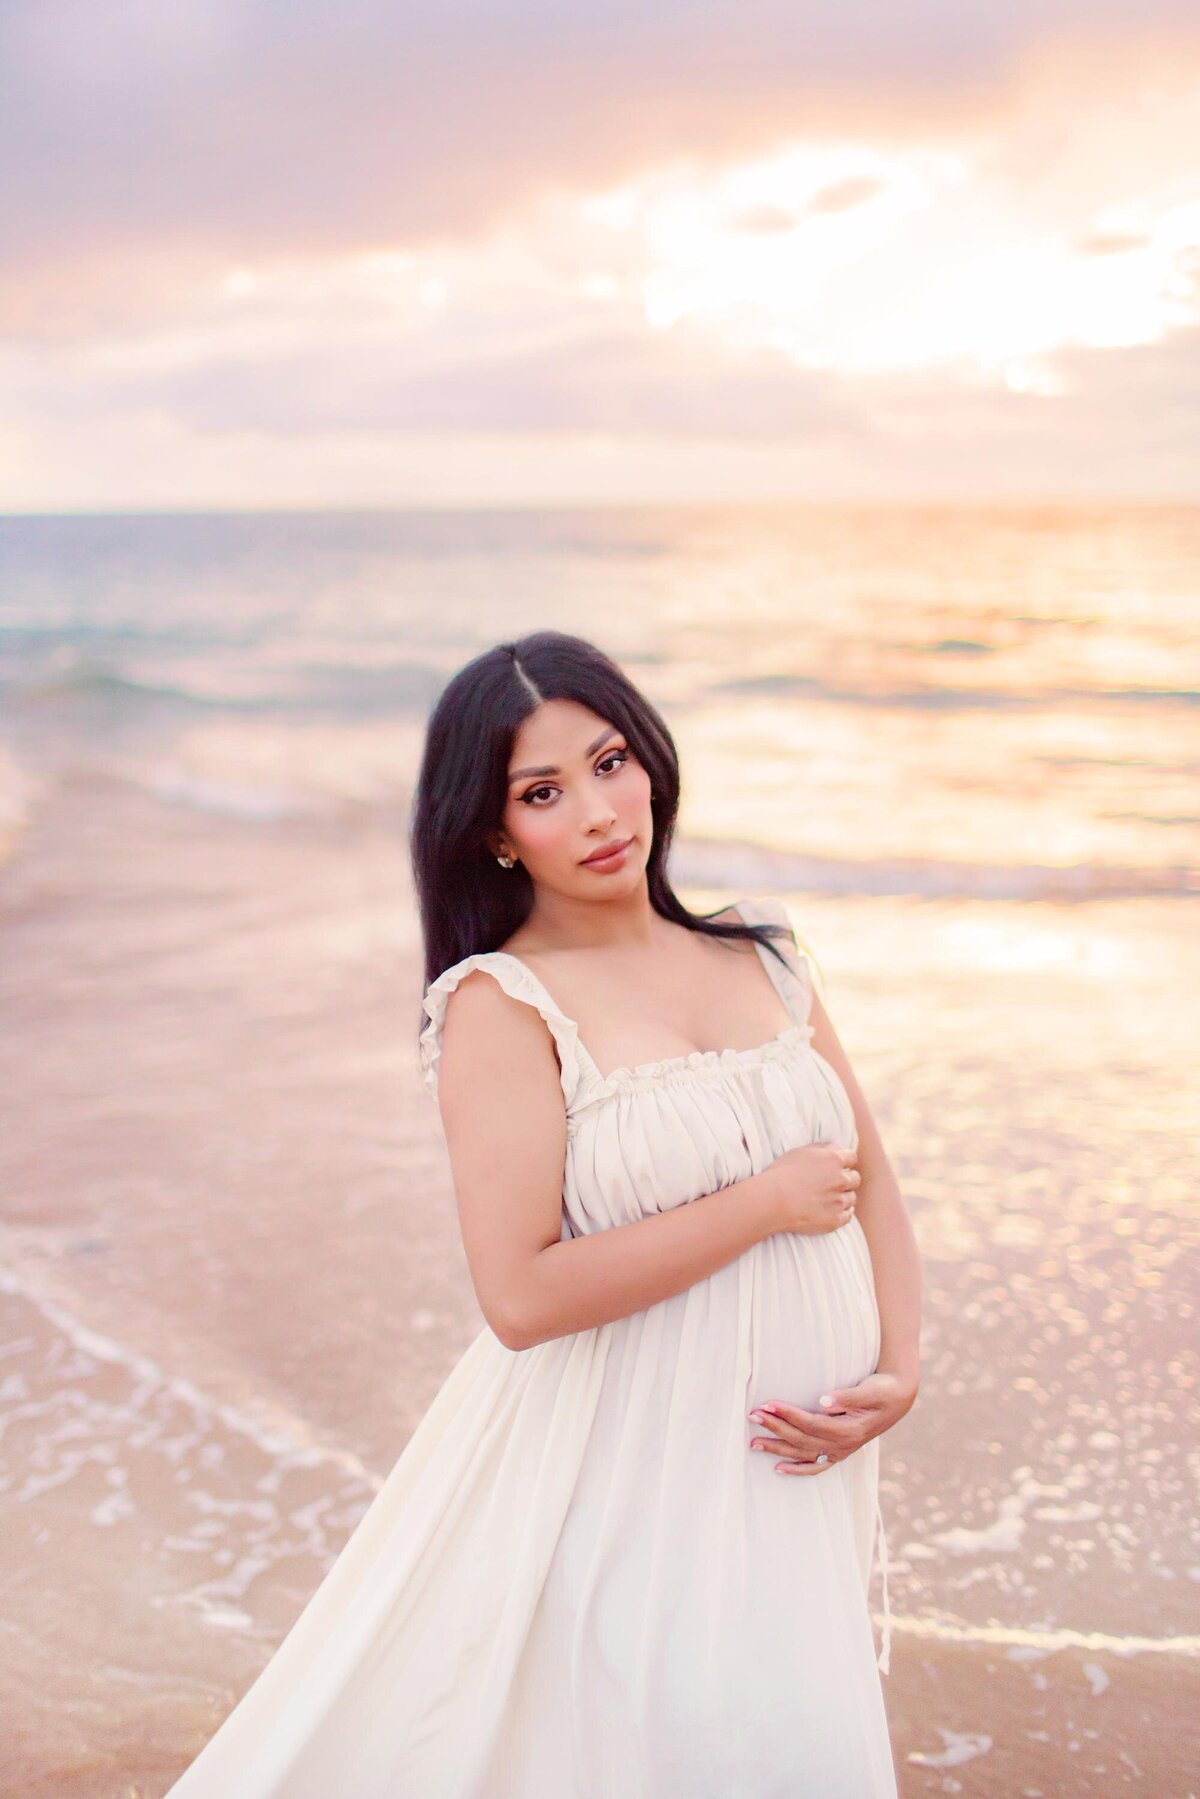 Beautiful pregnant woman in ruffled maternity dress looks at the camera and poses for her babymoon pics on Maui